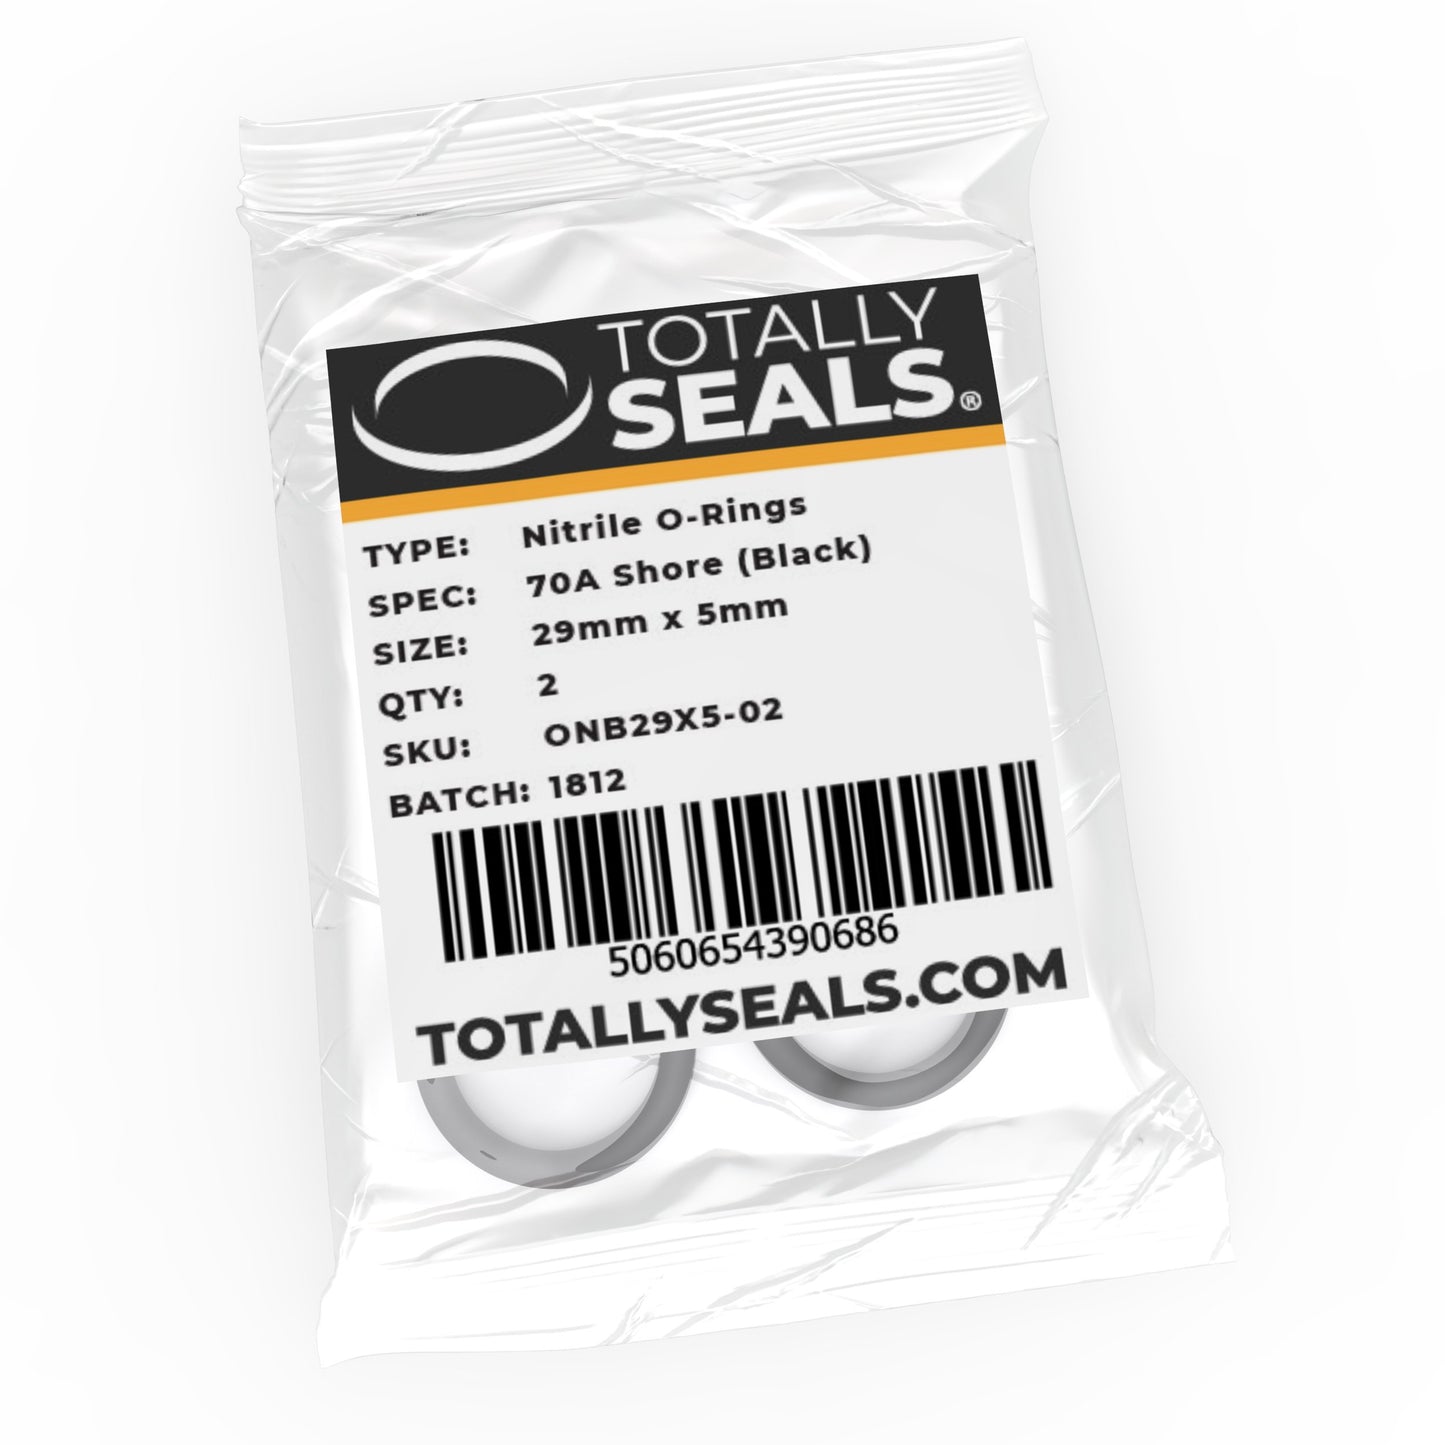 29mm x 5mm (39mm OD) Nitrile O-Rings - Totally Seals®